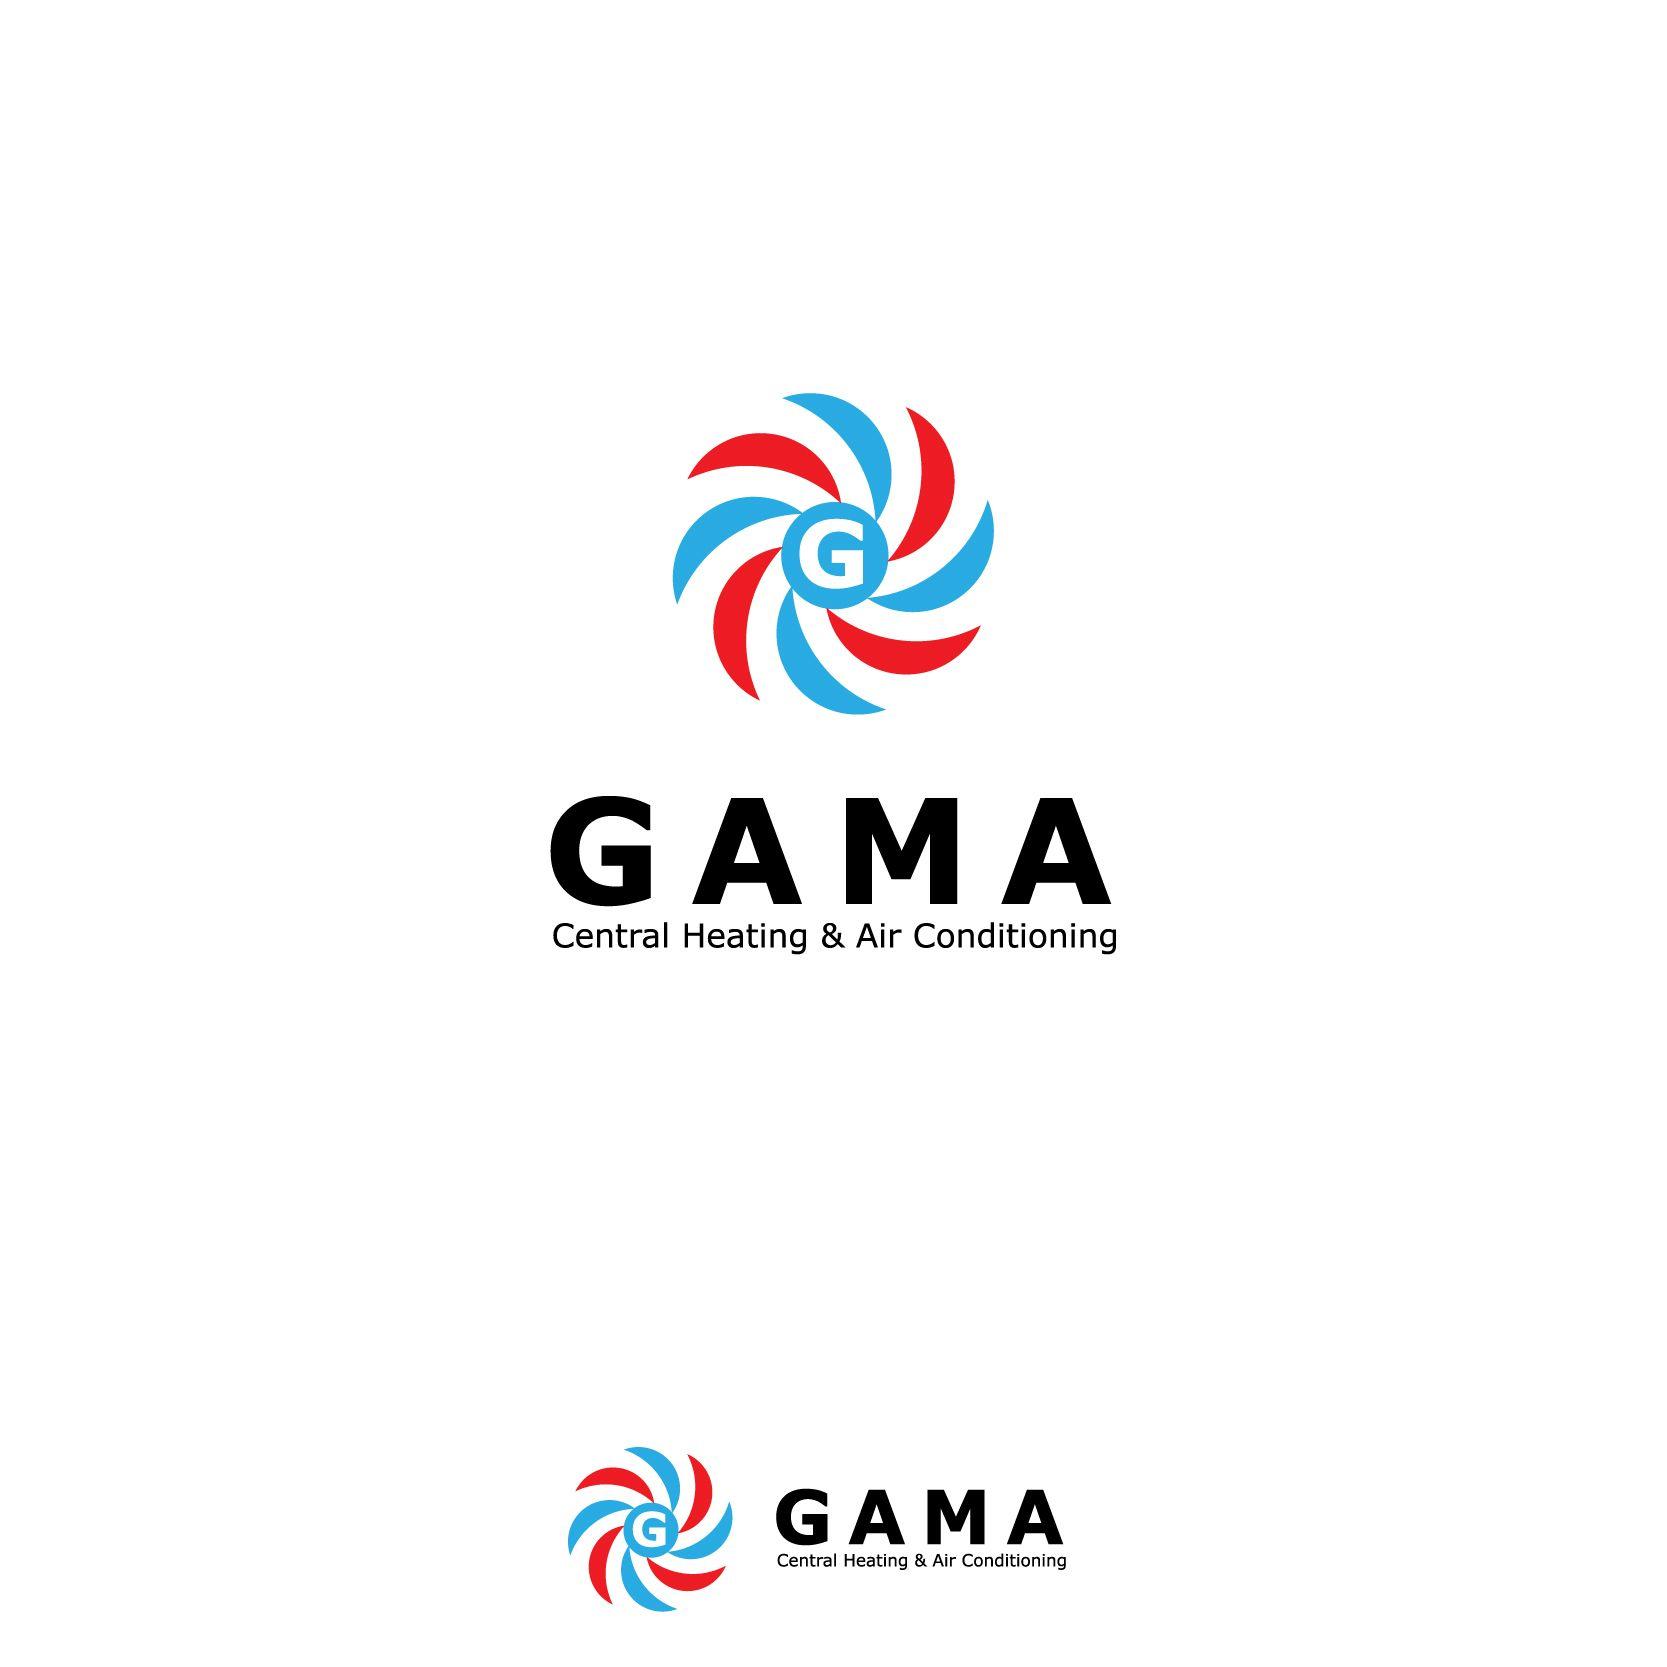 Gama Logo - Construction Logo Design for GAMA Central Heating & Air Conditioning ...